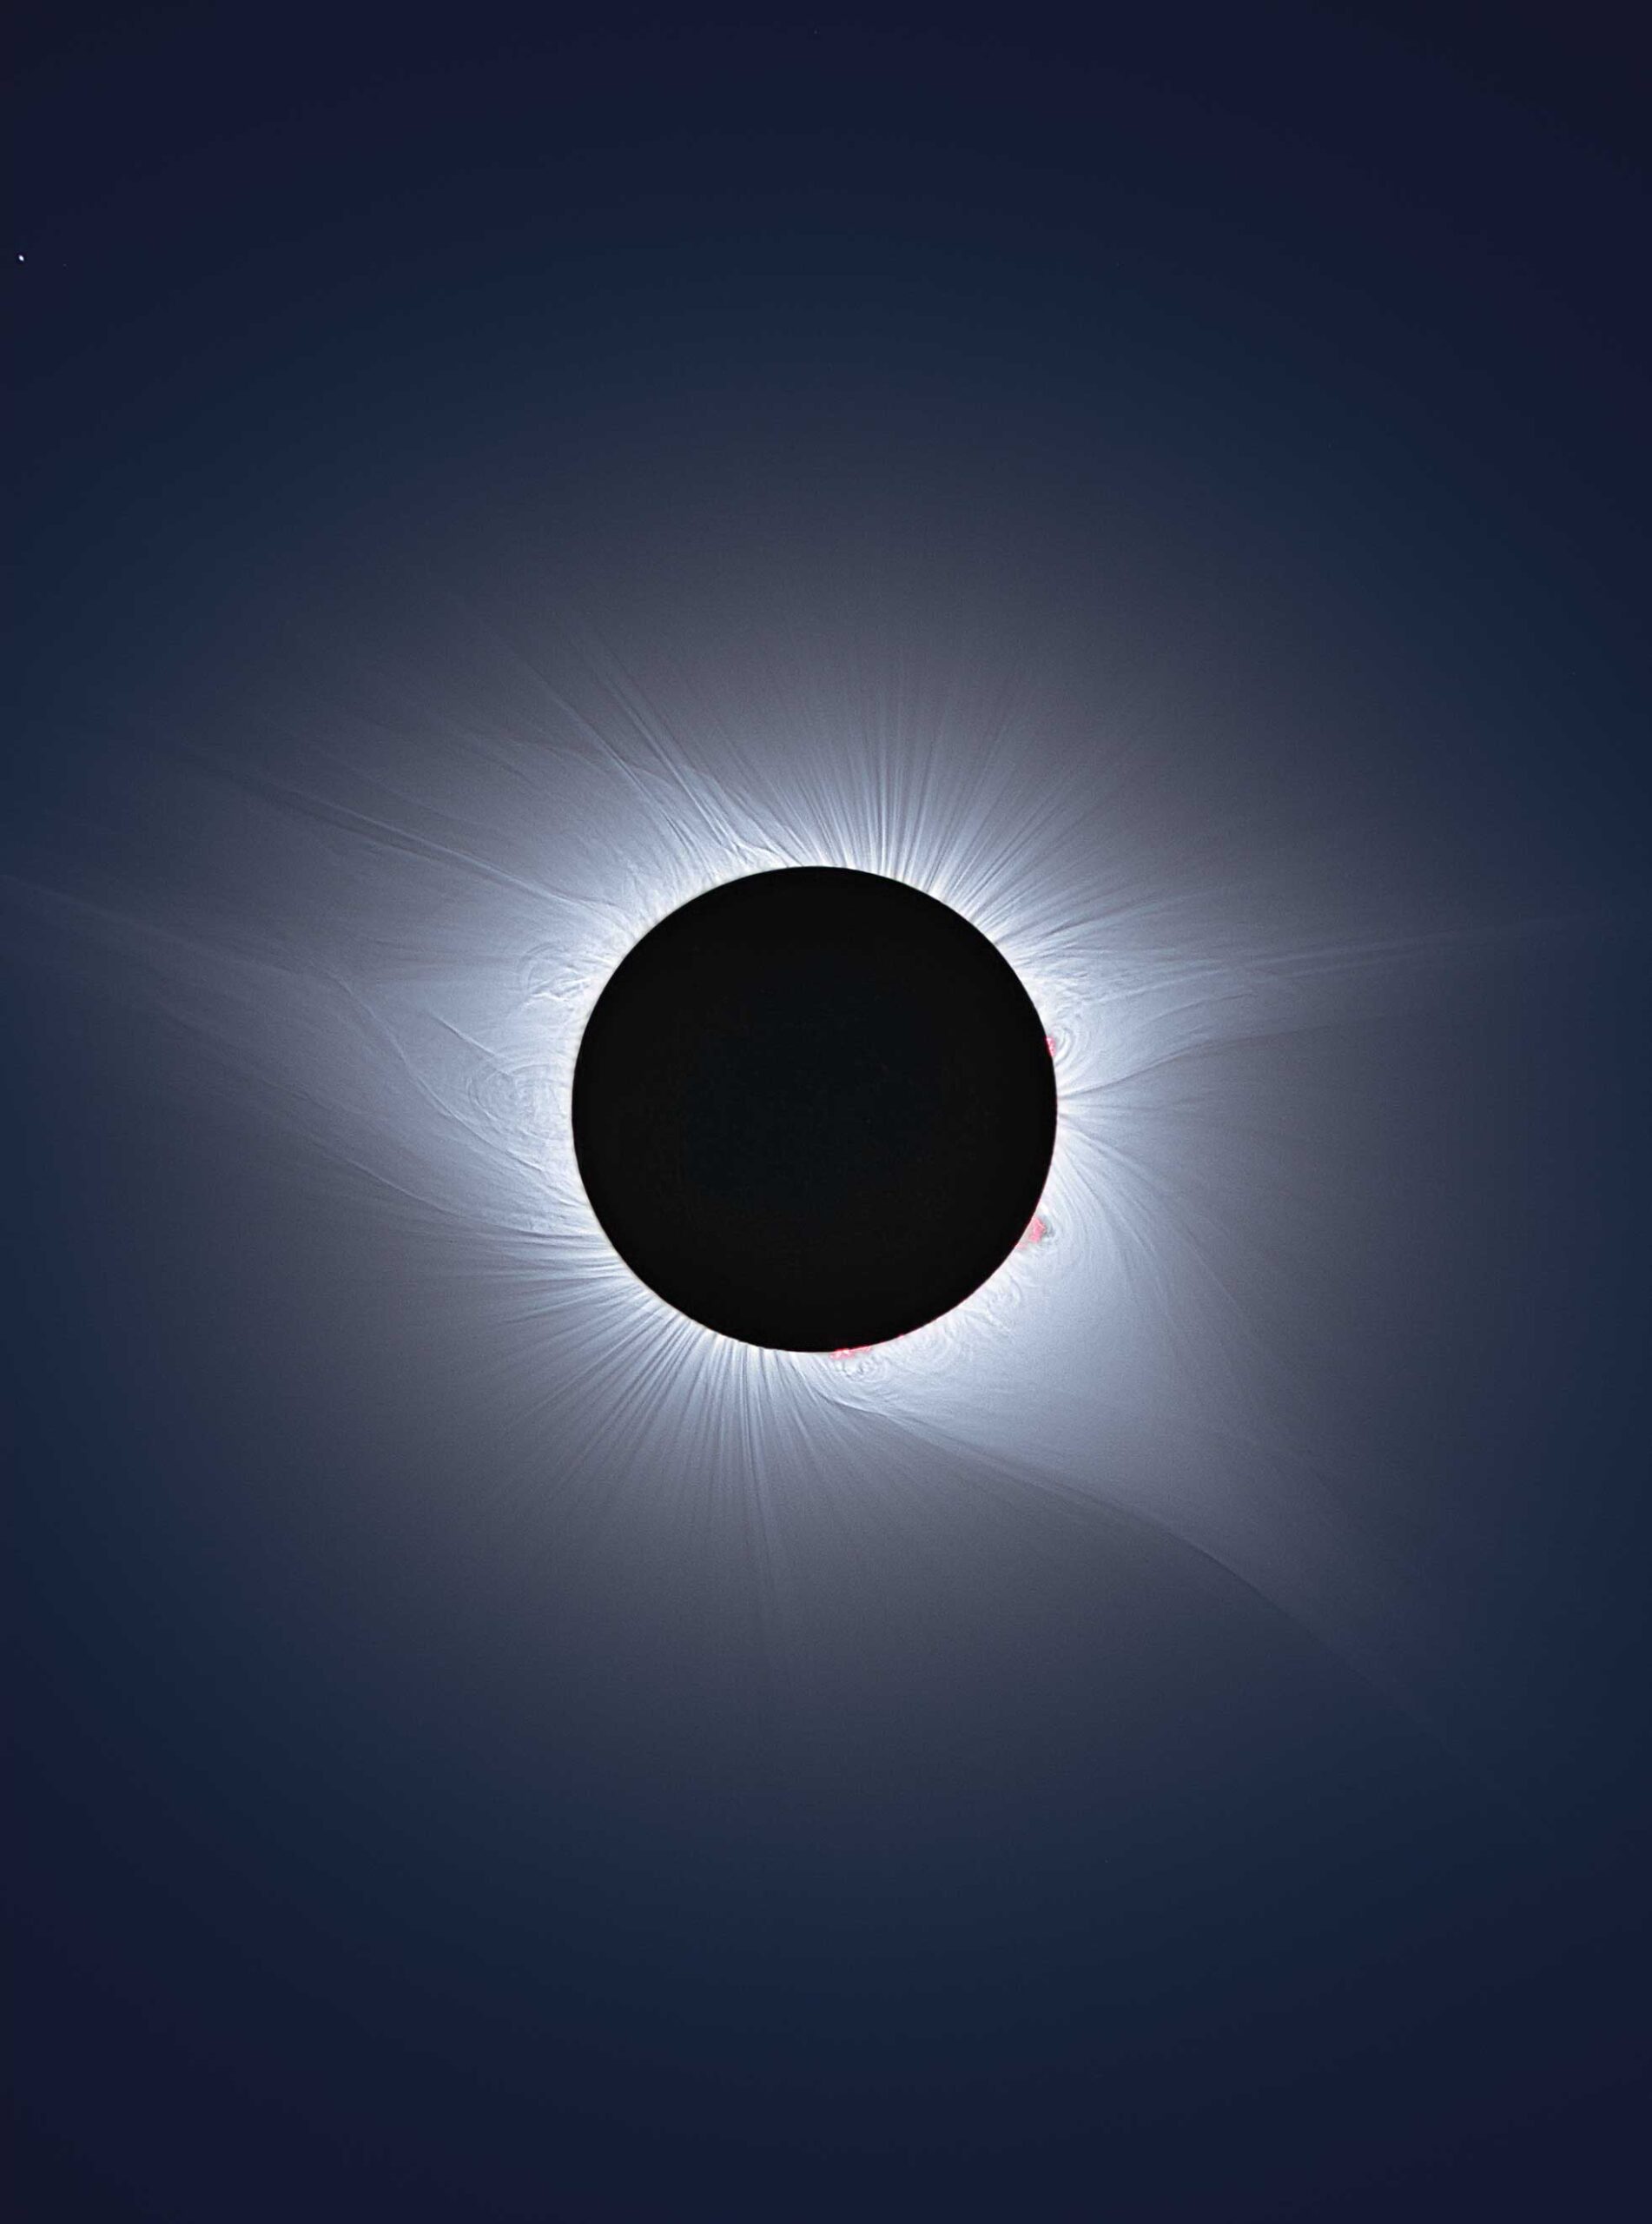 Eclipse Photography: Reveal Totality in HDR & Telescope & Telescope